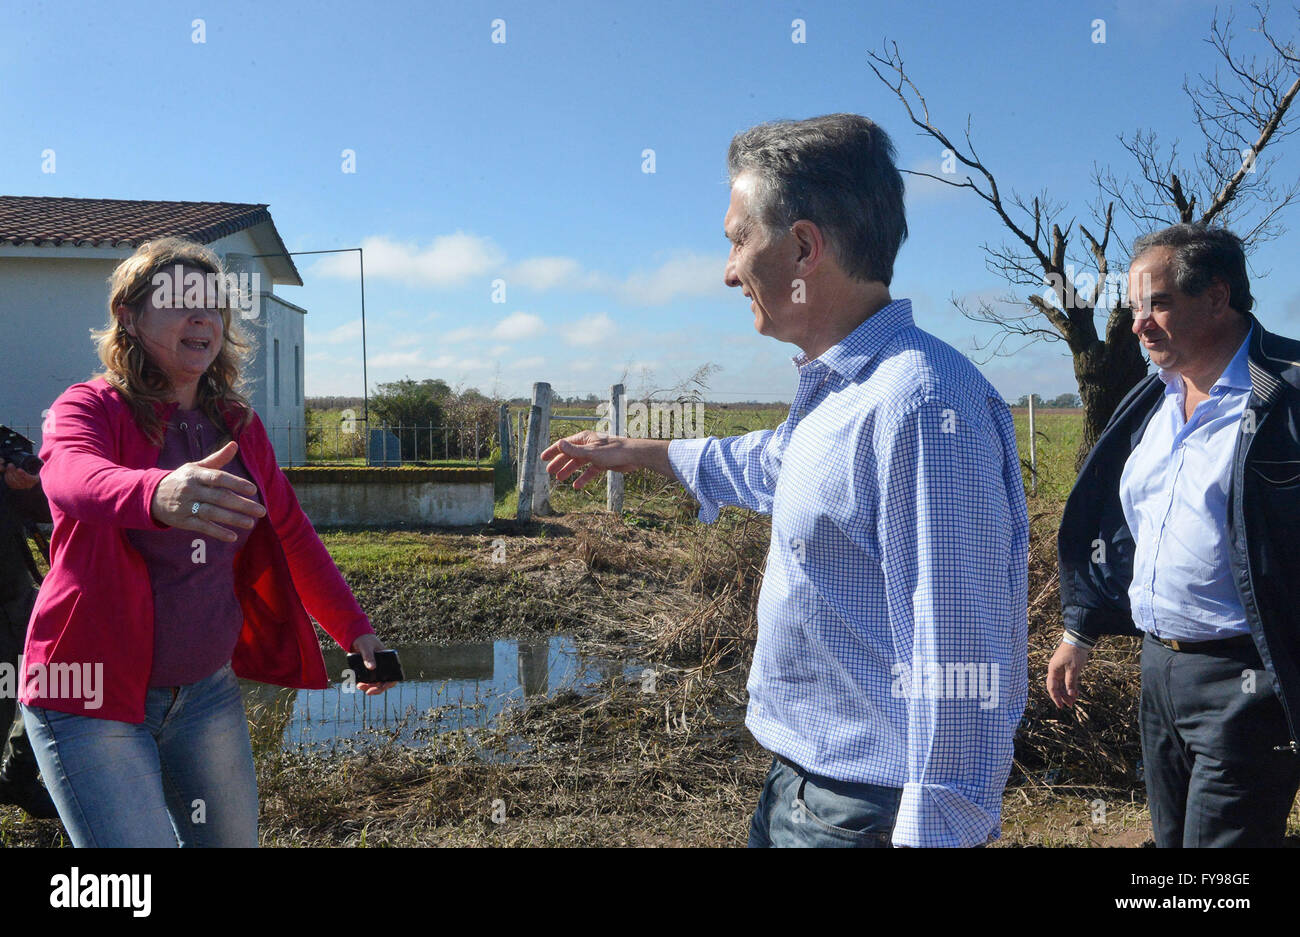 Santa Fe. 23rd Apr, 2016. Argentina's President Mauricio Macri (C) interacts with a woman whose family was affected by flood in Colonia Fidela of Santa Fe Province April 23, 2016. © TELAM/Xinhua/Alamy Live News Stock Photo